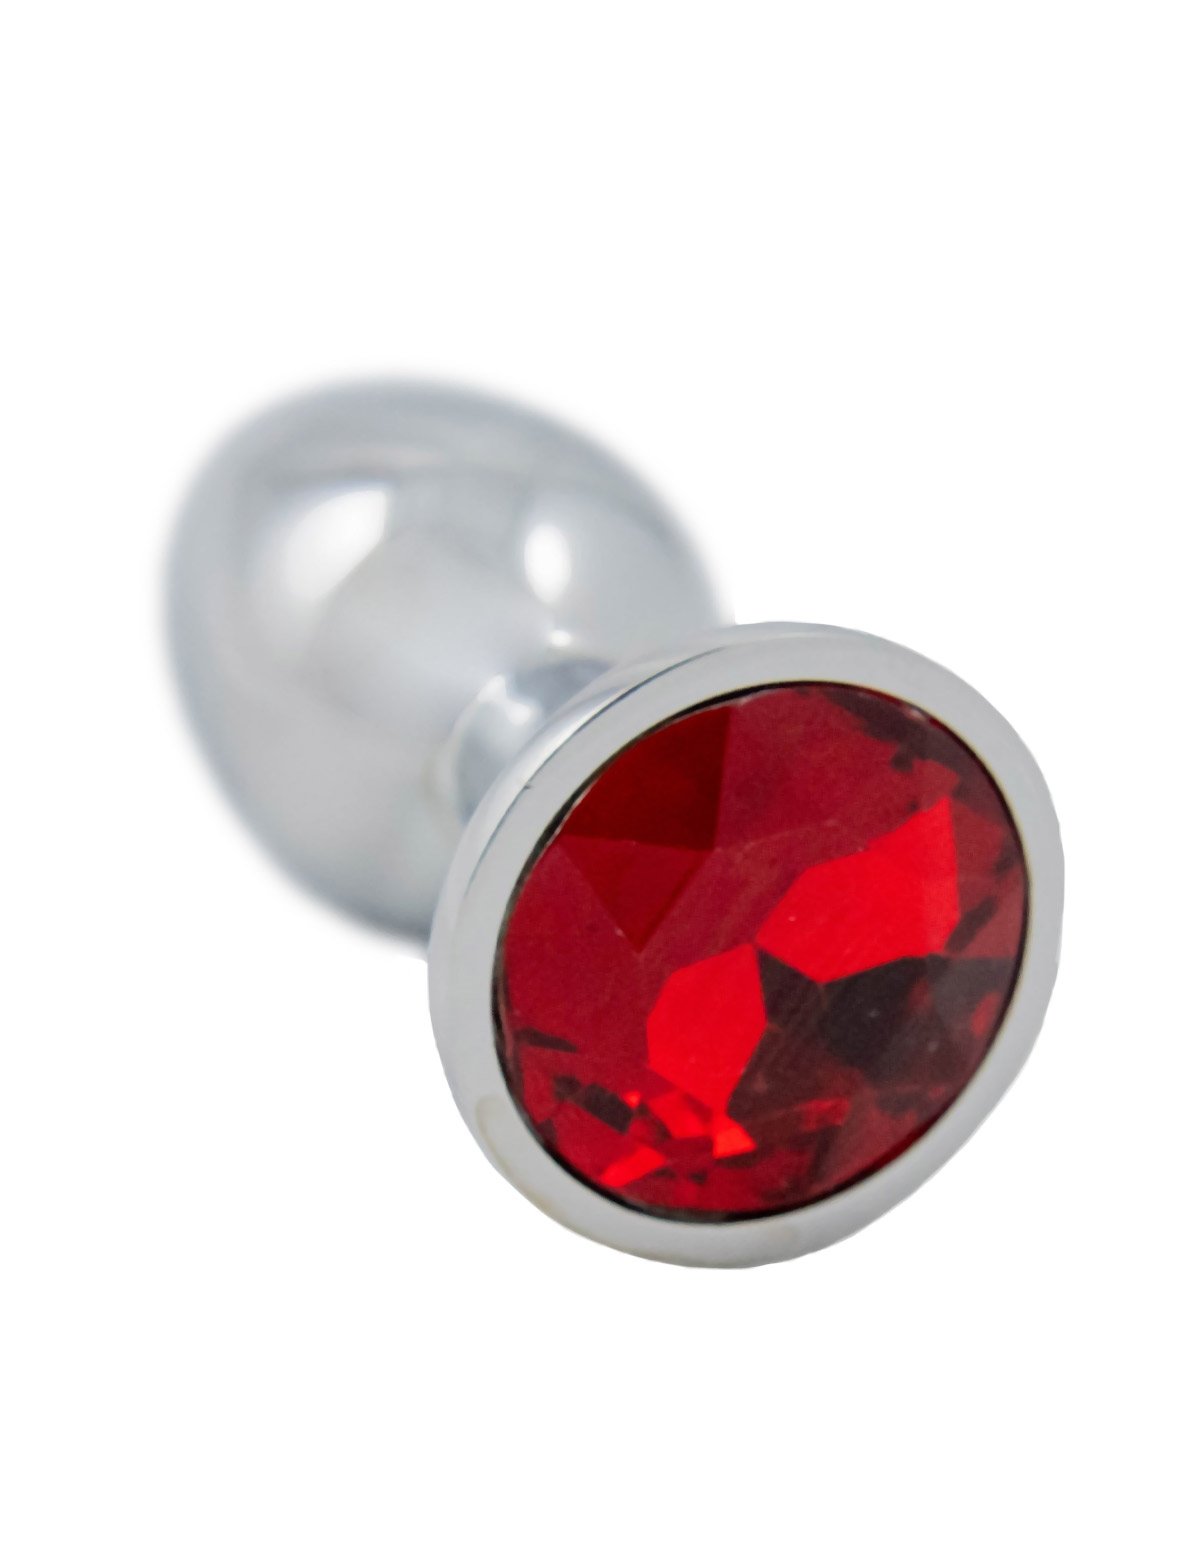 alternate image for Booty Buddies - Chrome Plug With Red Gem